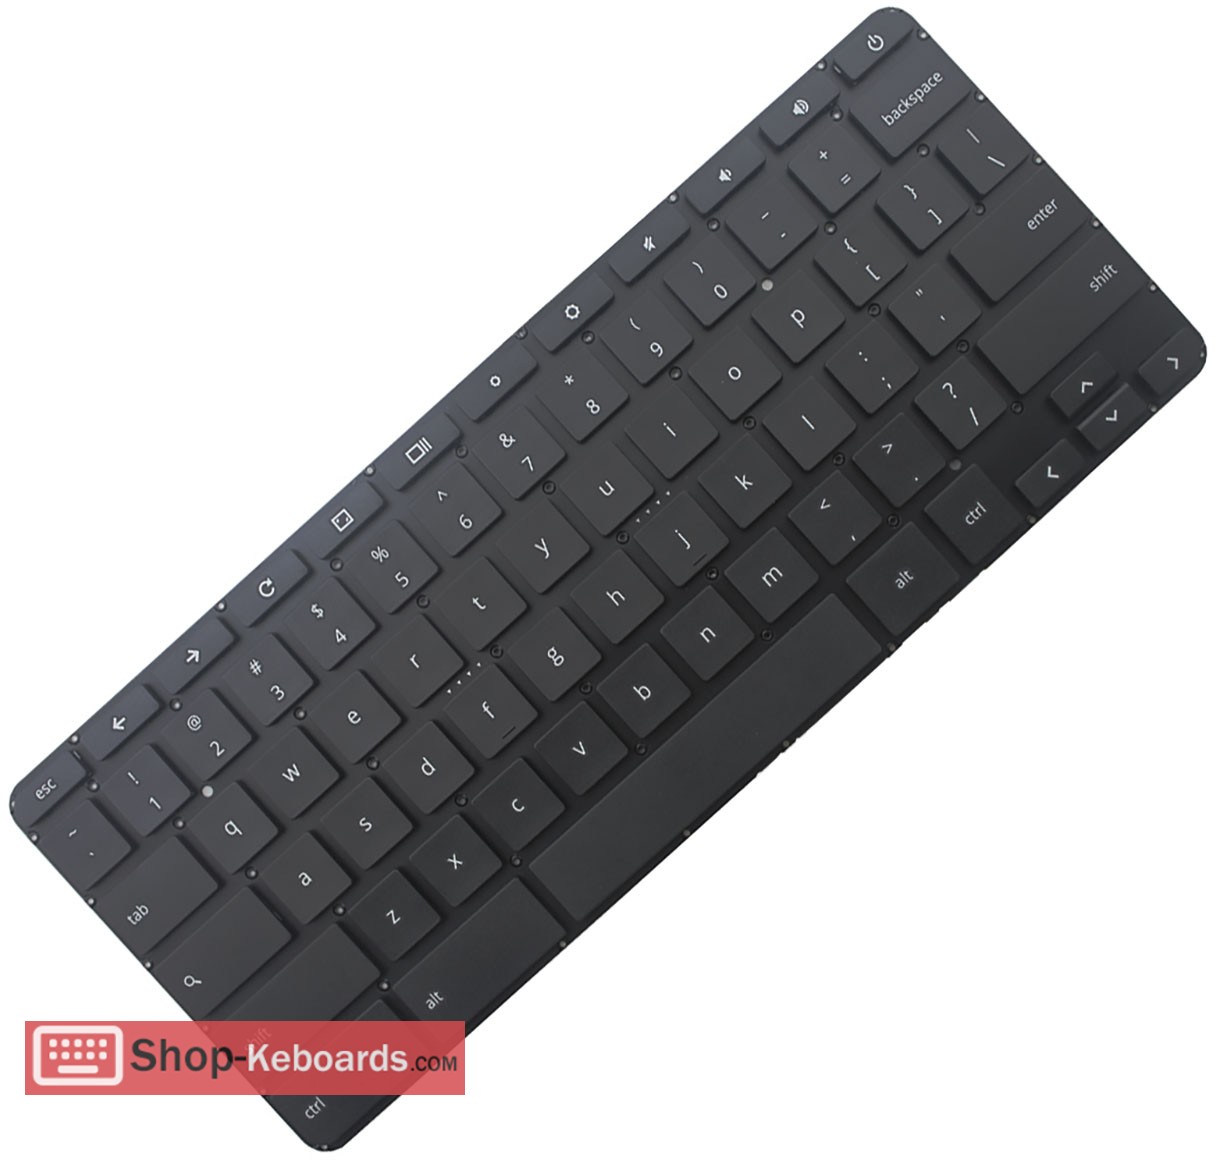 HP Chromebook 11 G4 Keyboard replacement